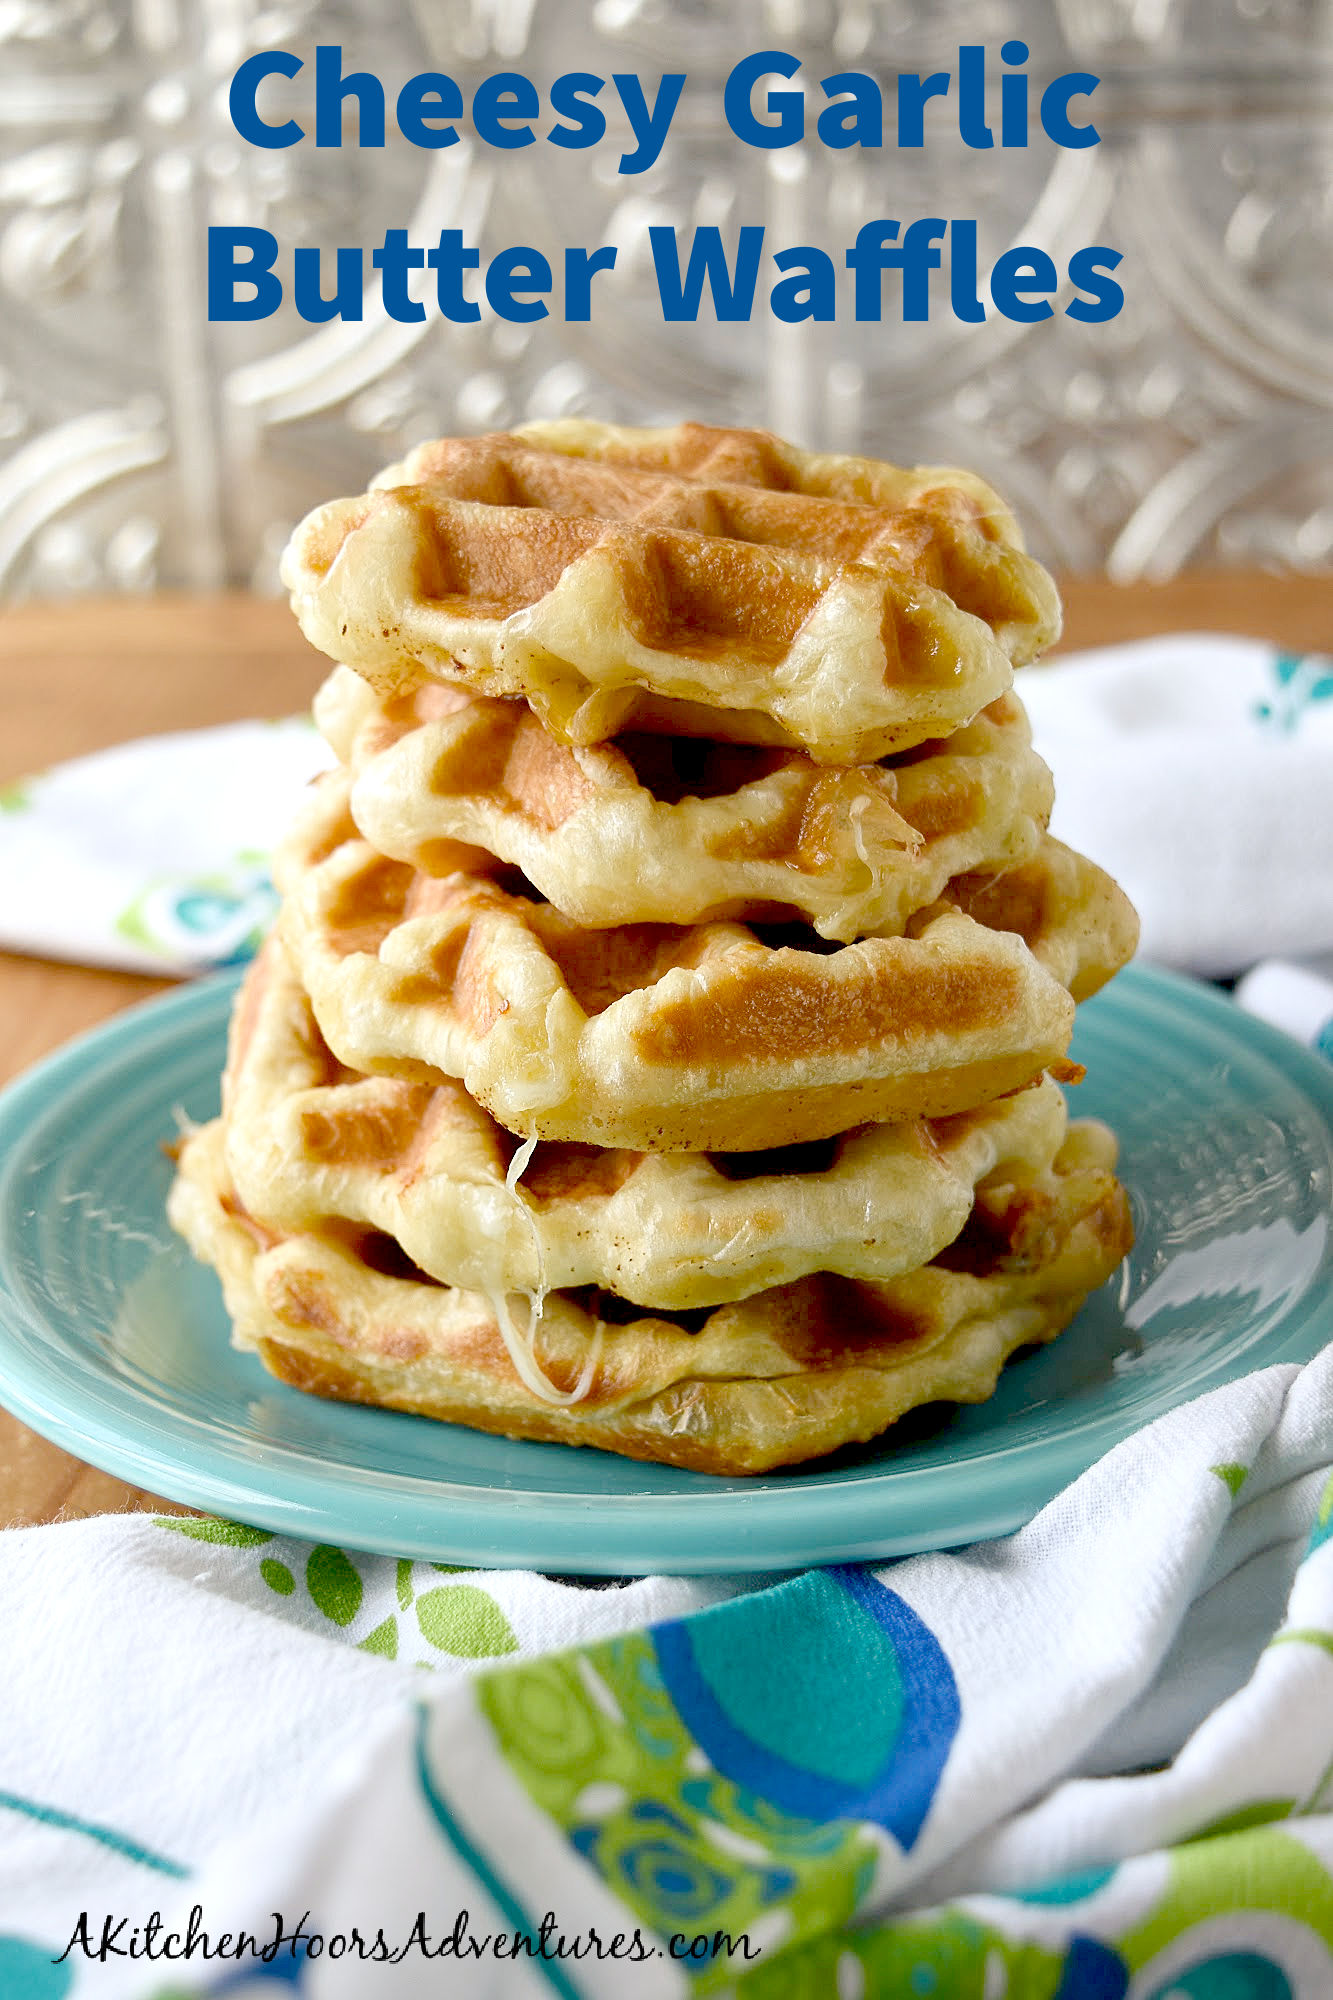 Cheesy Garlic Butter Waffles have only three ingredients.  They’re easy to make and taste so delicious!  #OurFamilyTable